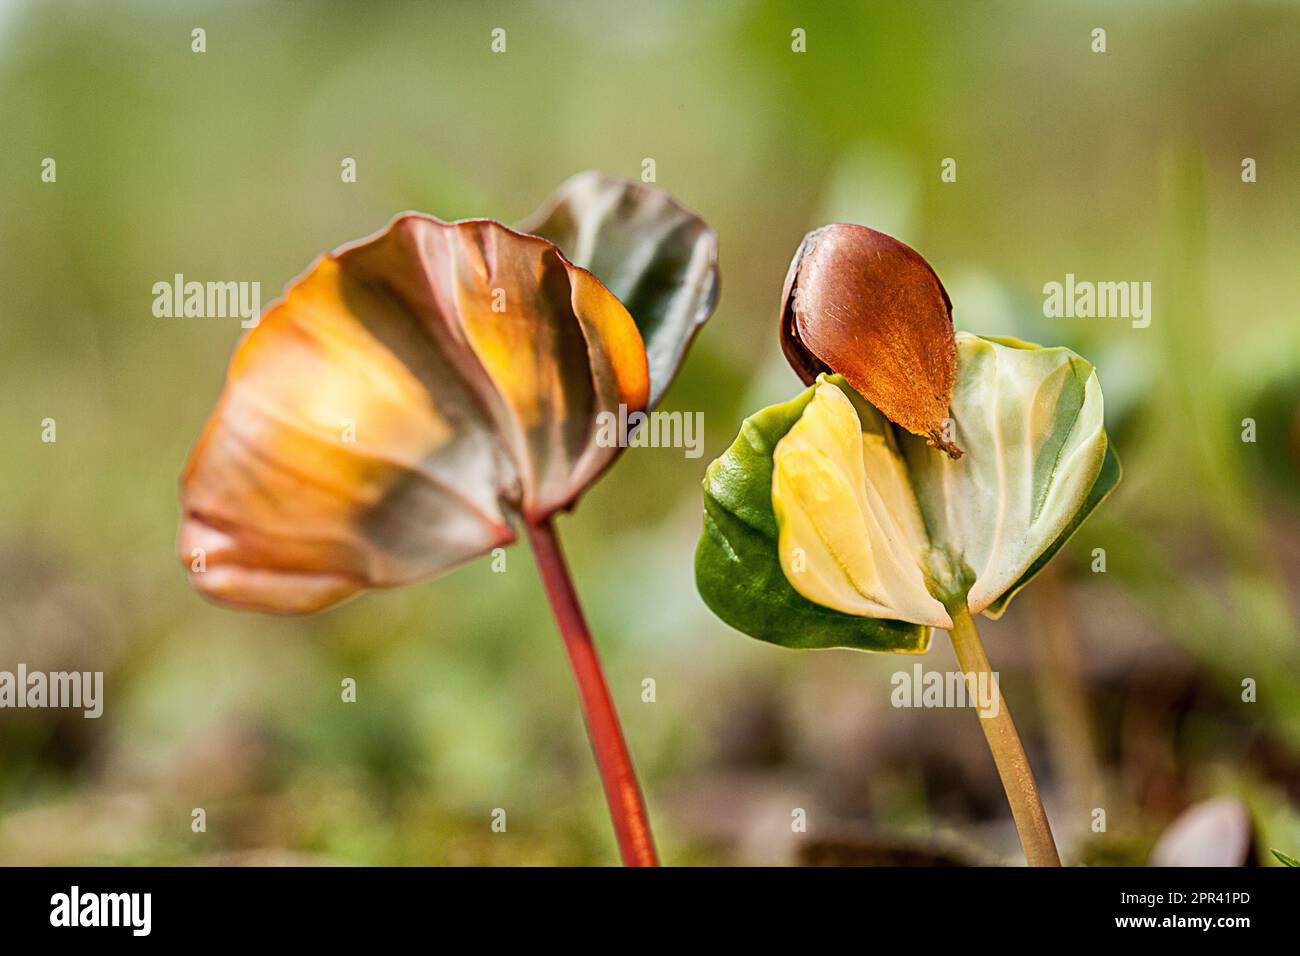 common beech (Fagus sylvatica), seedlings in backlight, Germany Stock Photo